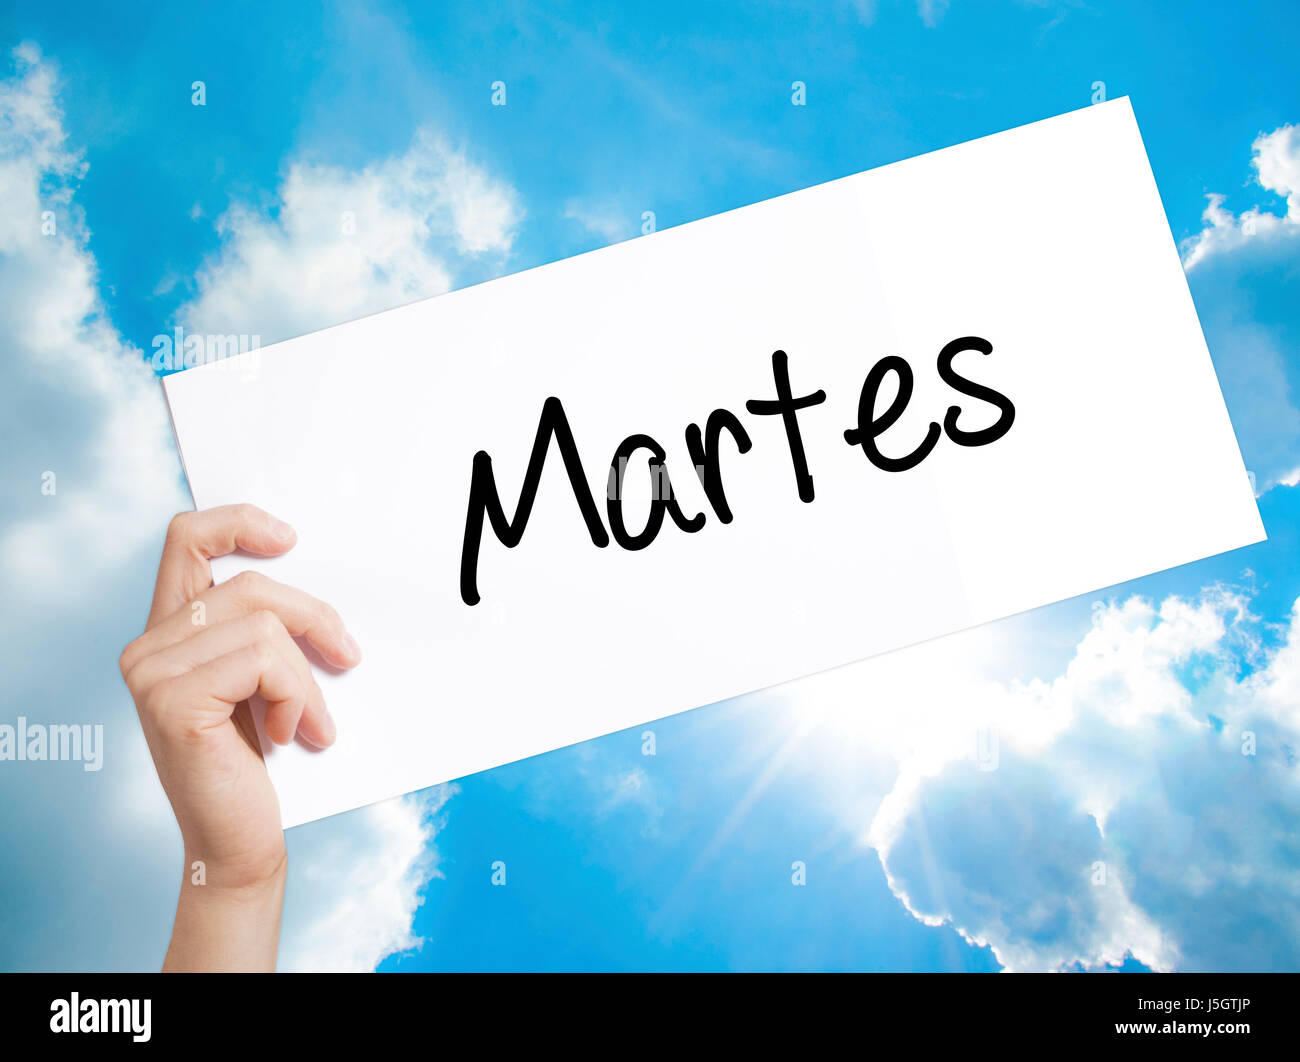 Martes (Tuesday in Spanish) Sign on white paper. Man Hand Holding